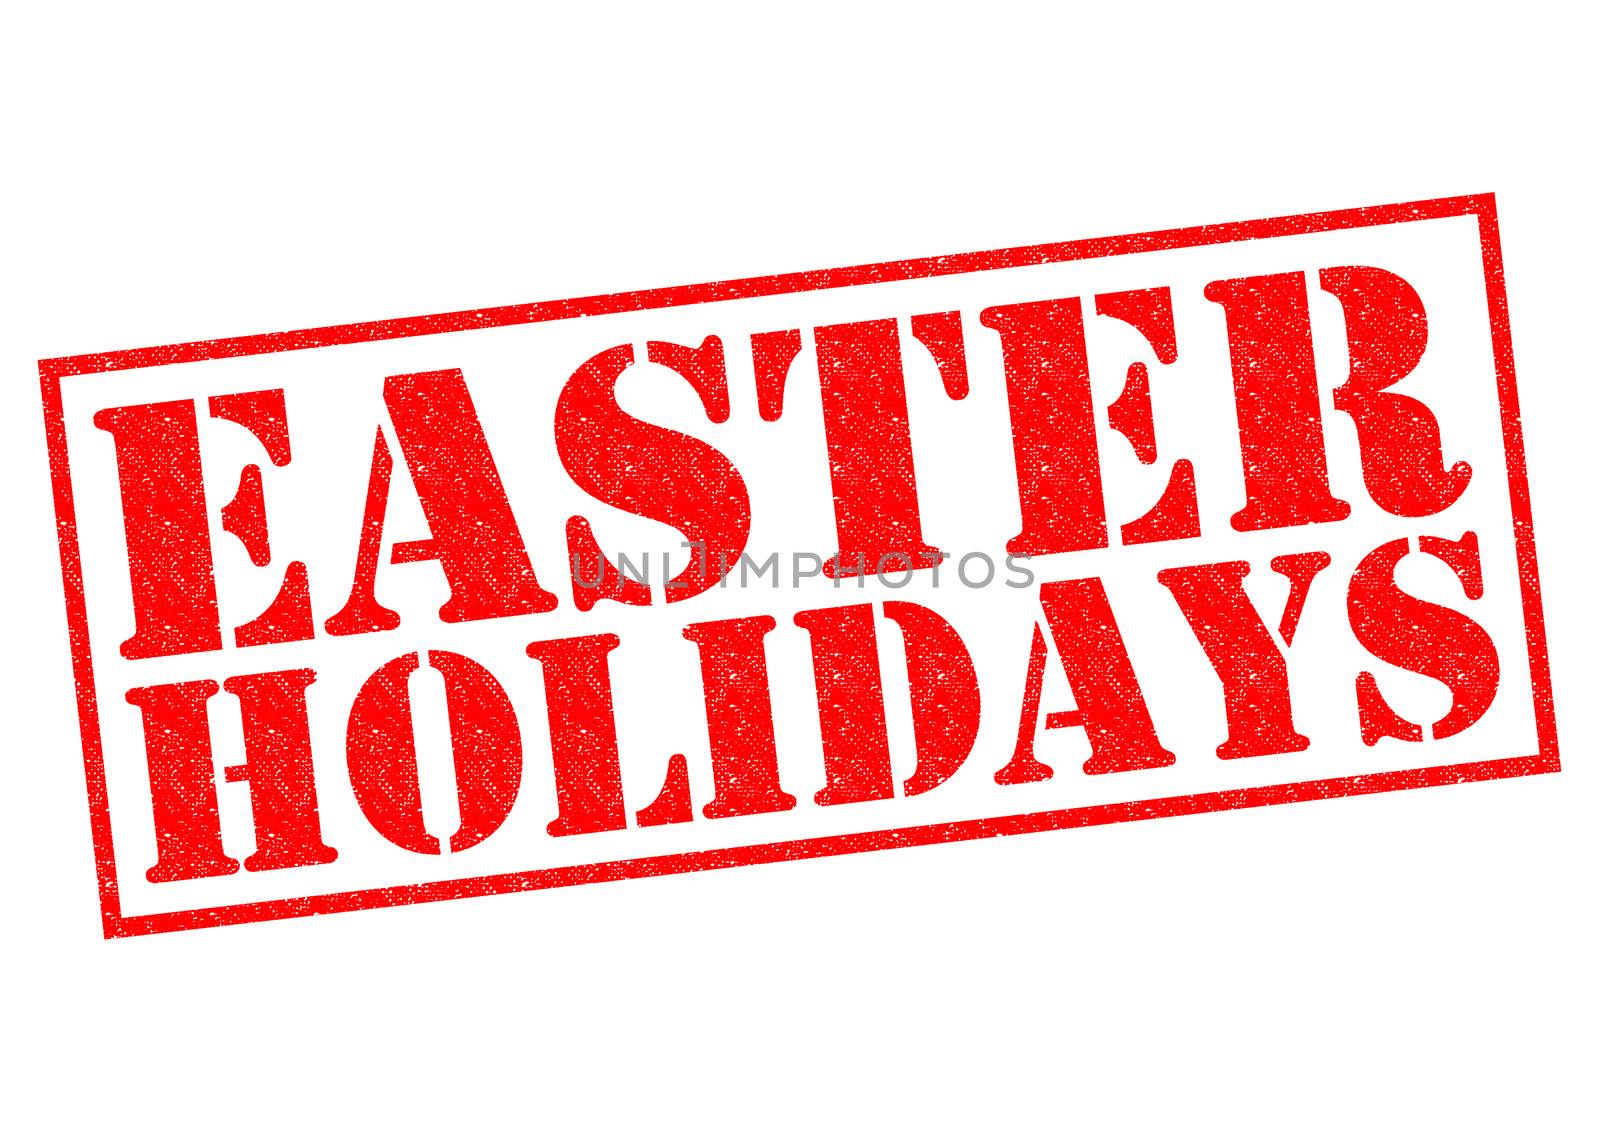 EASTER HOLIDAYS red Rubber Stamp over a white background.